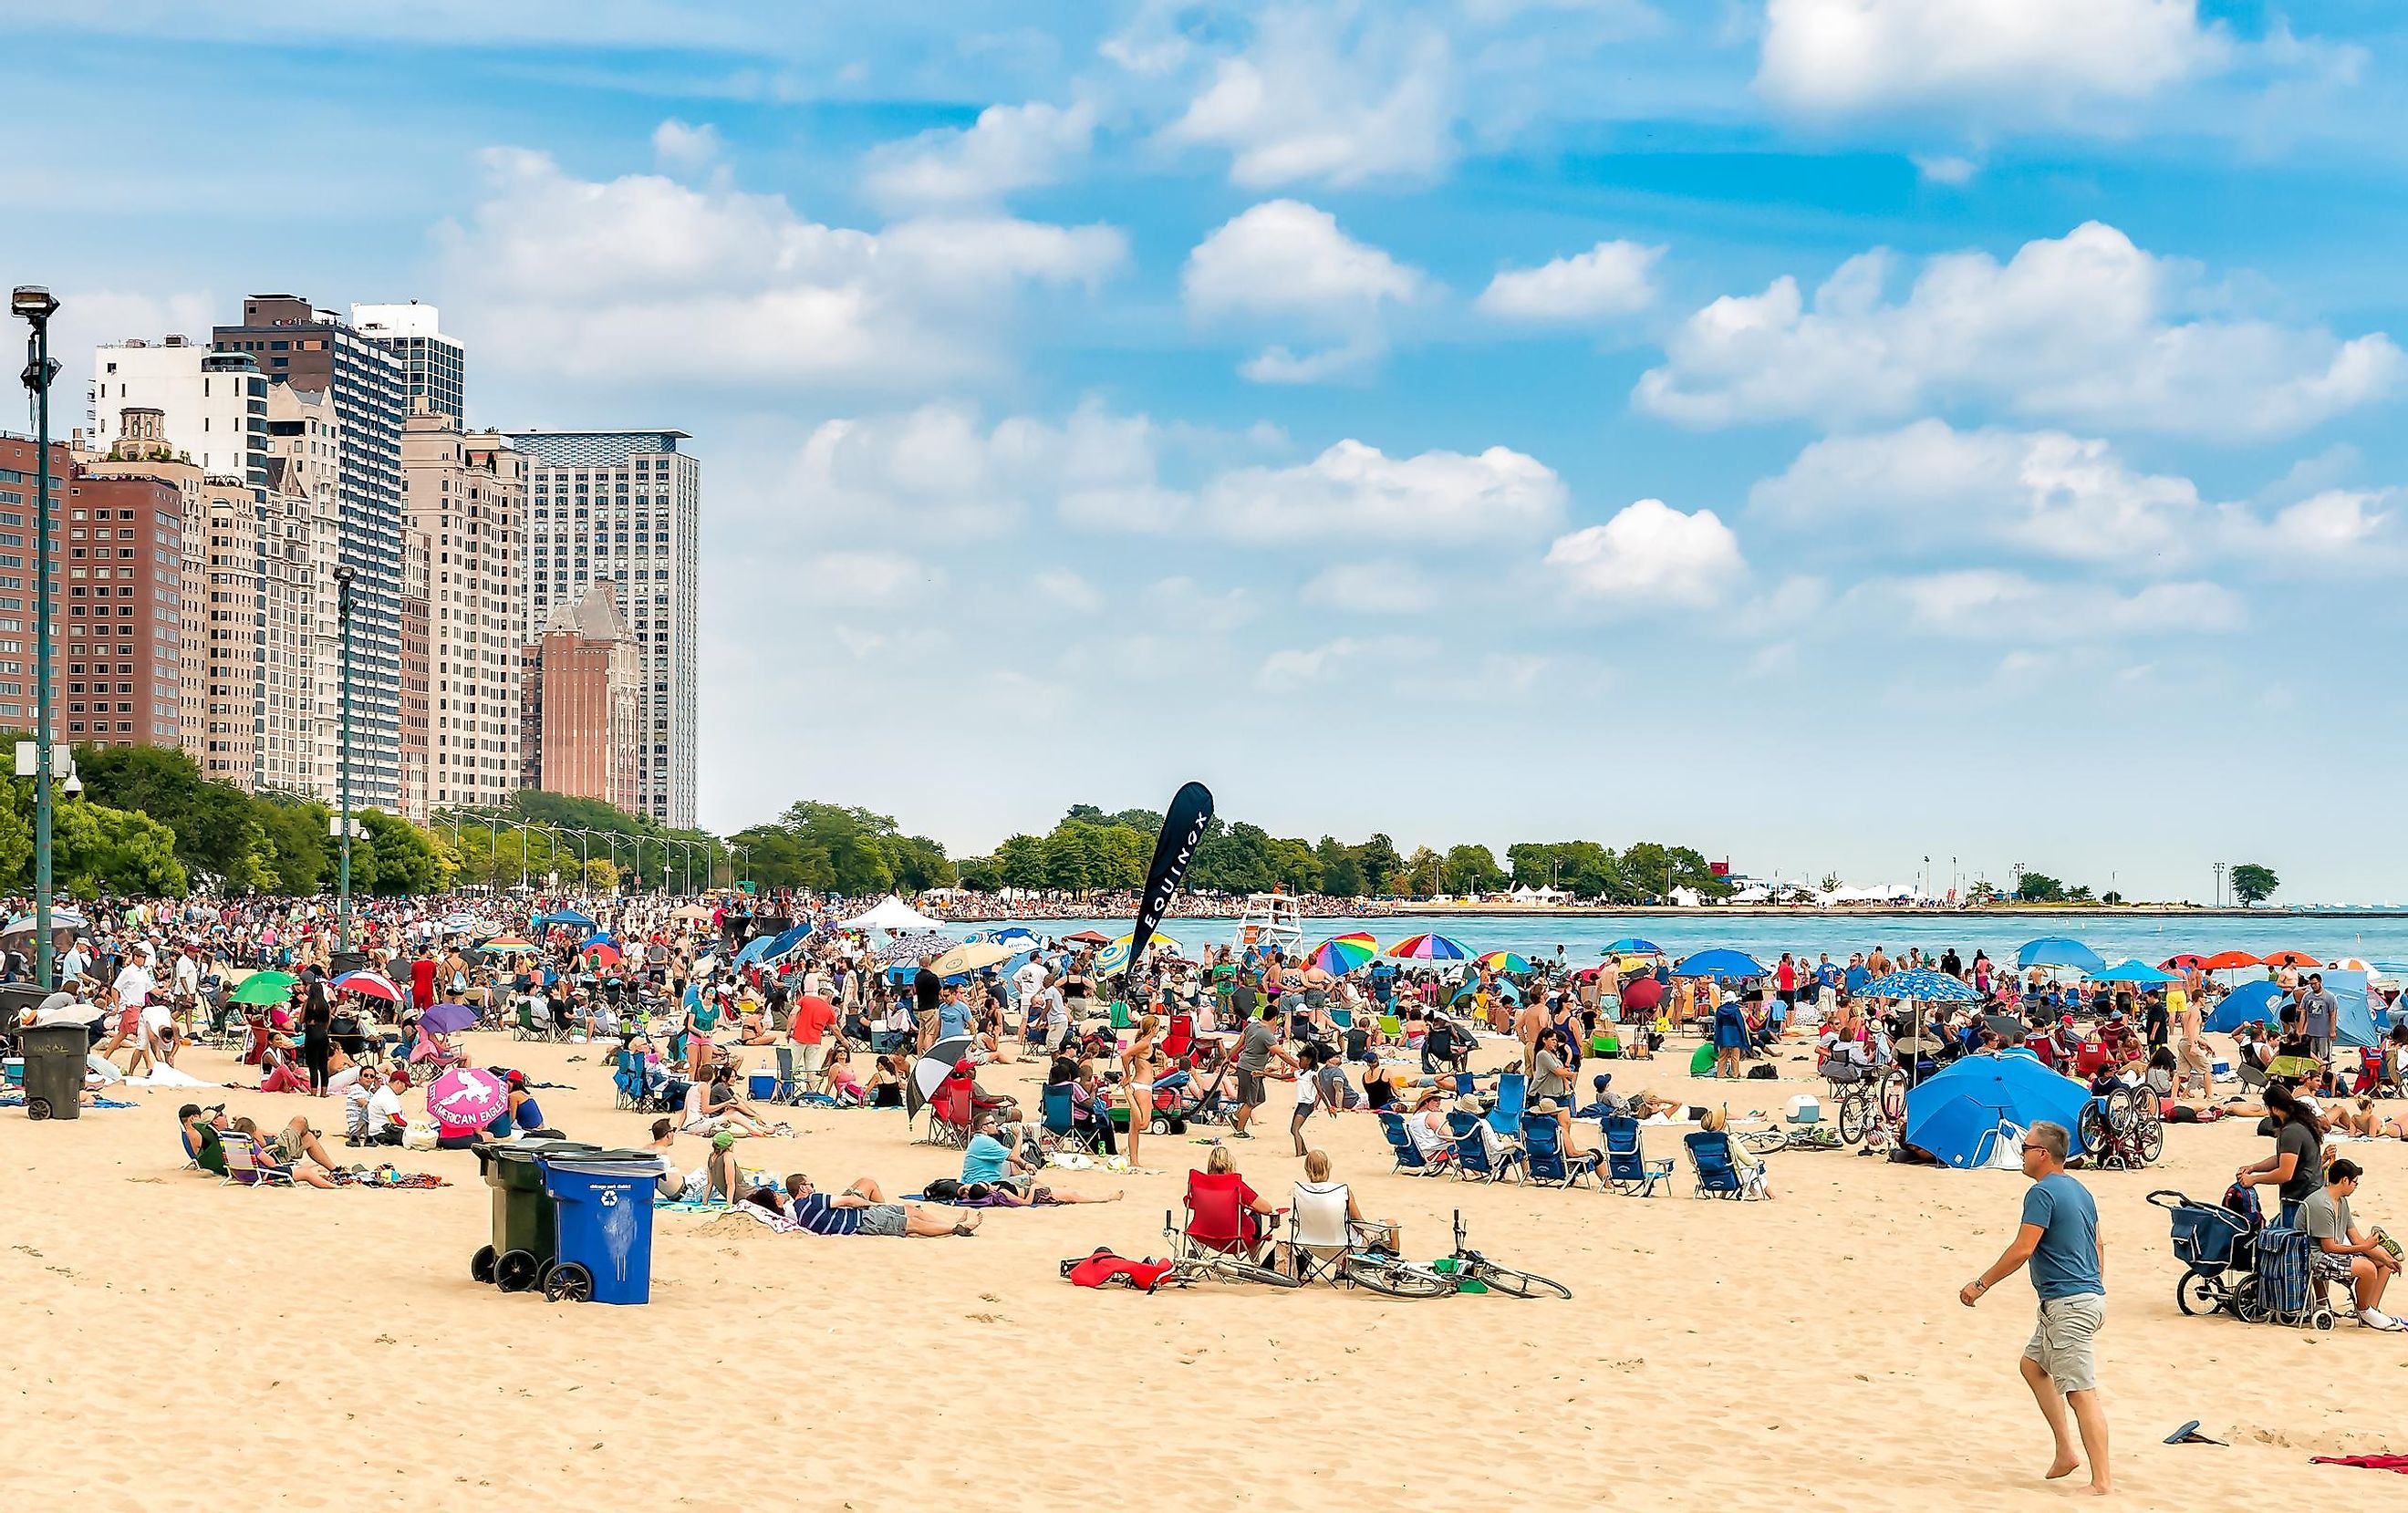 People enjoying summer time at the popular North Avenue Beach on the lake Michigan in Chicago